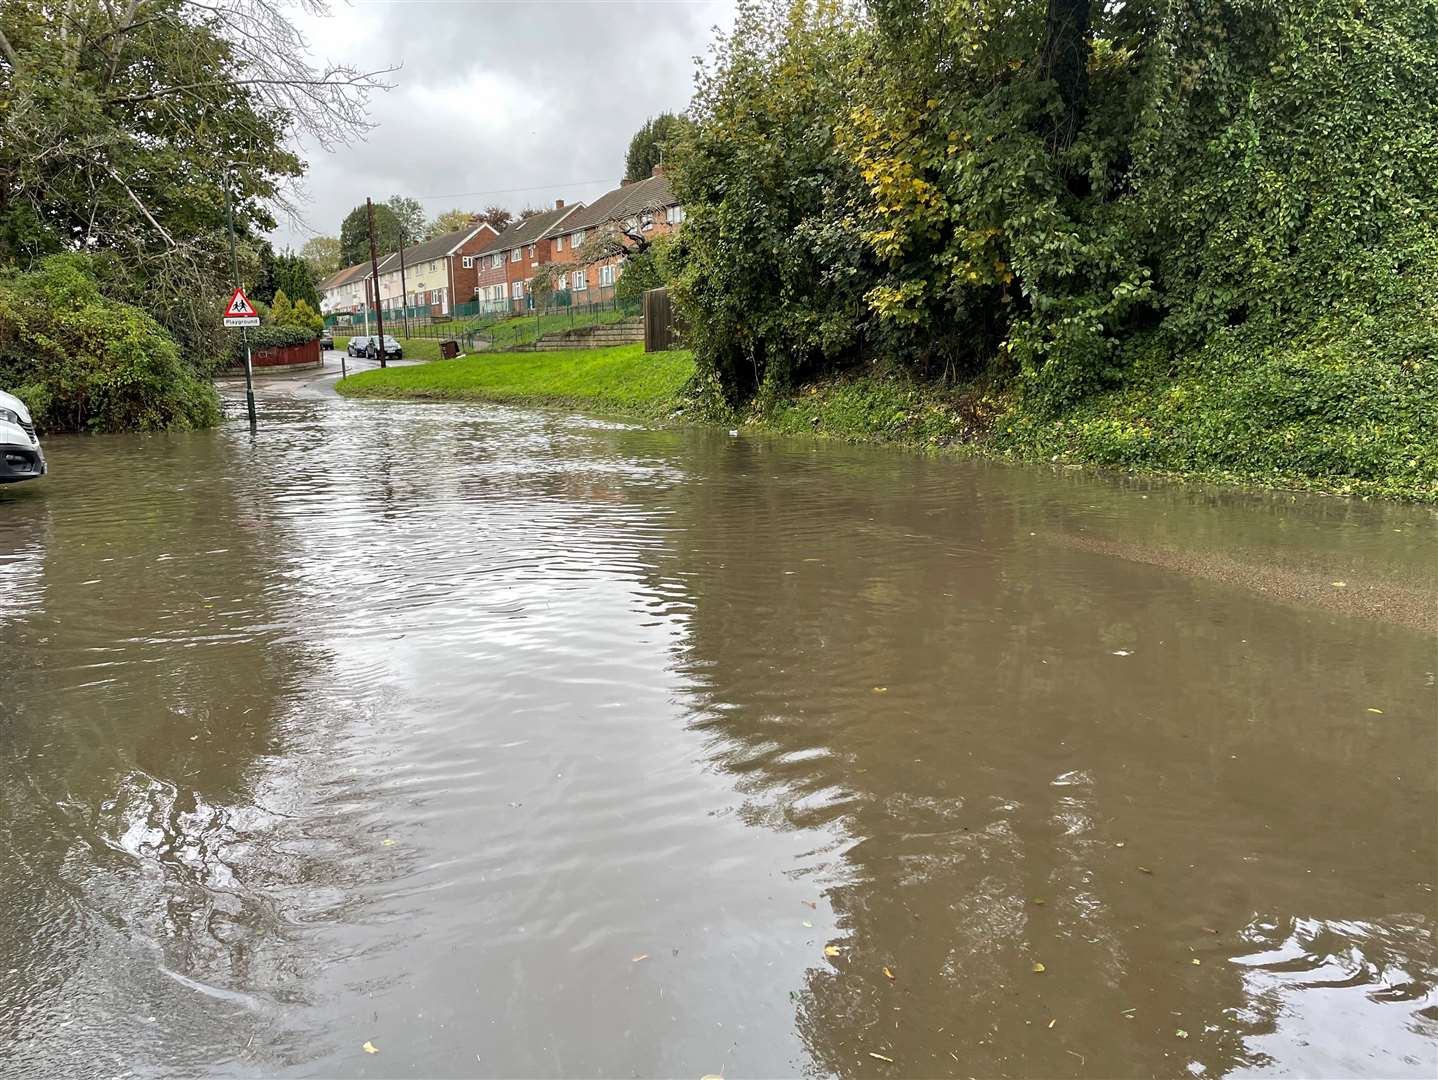 Pilgrims Way in Strood is also flooded